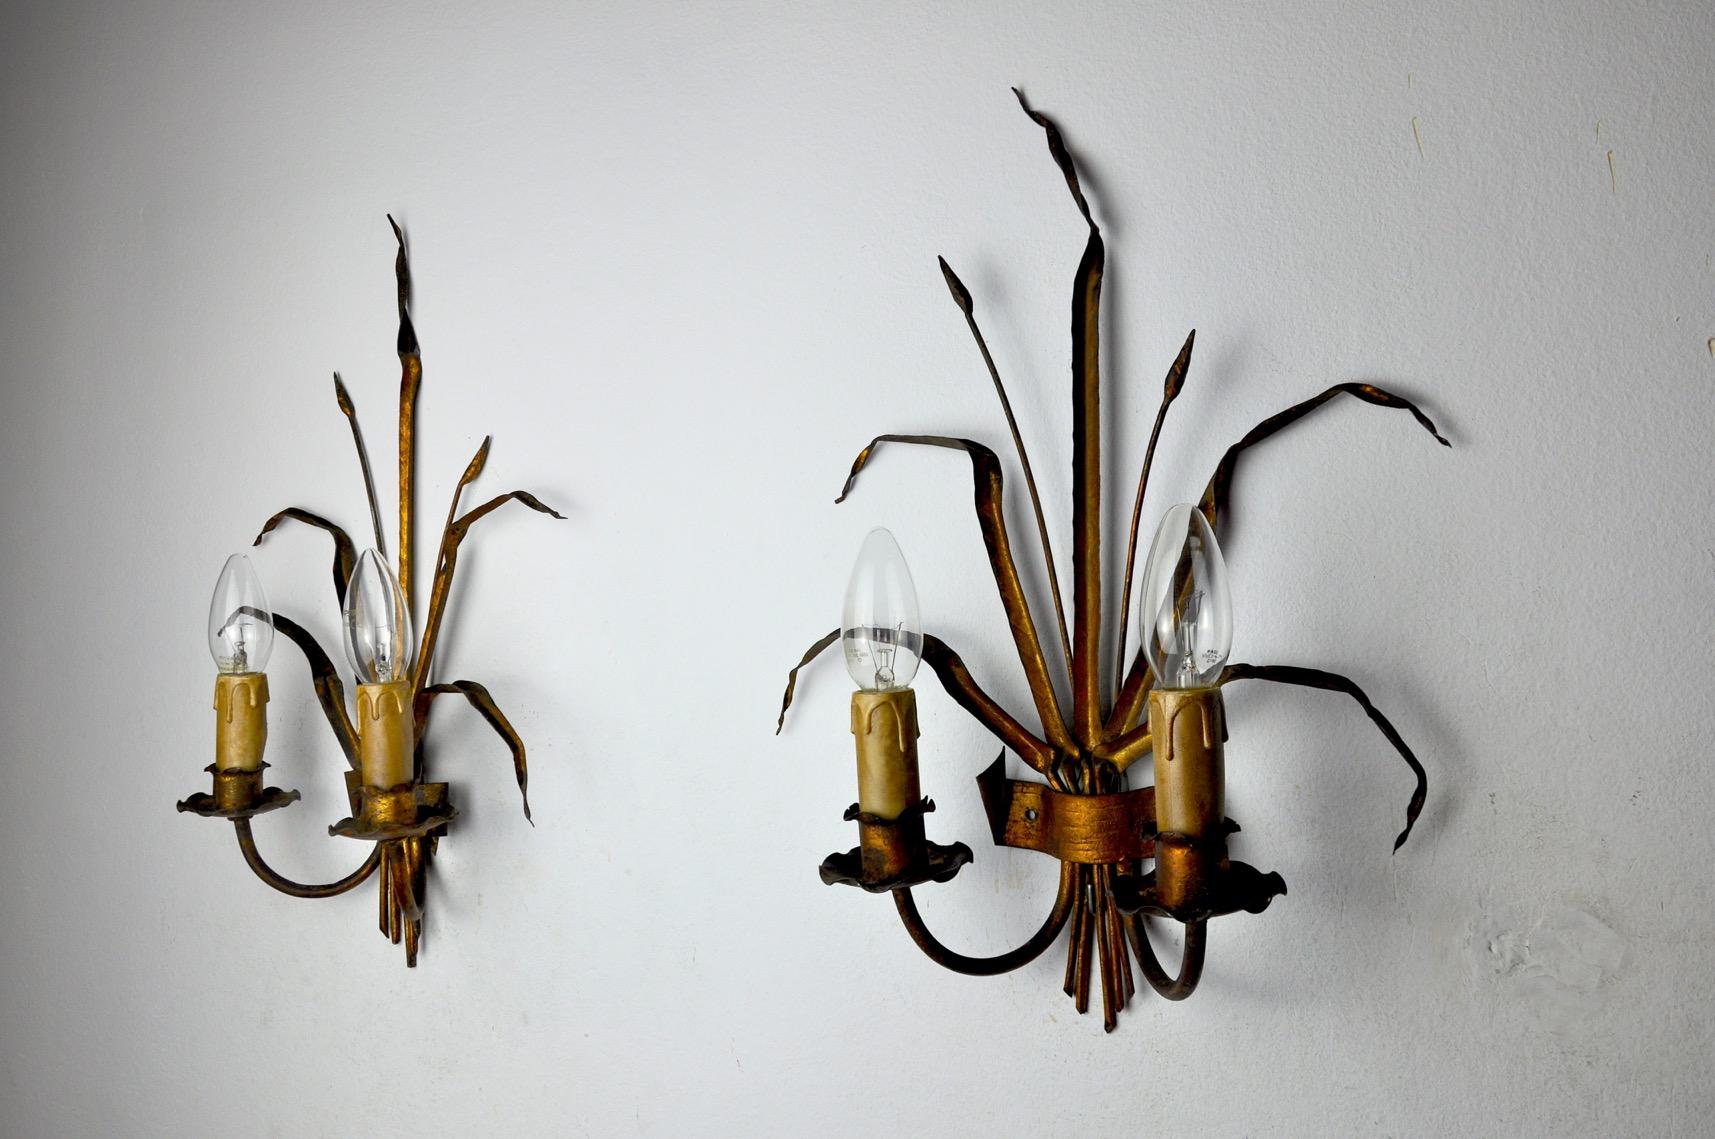 Spanish Pair of Floral Wall Lamps by Ferro Arte, Spain, circa 1960 For Sale